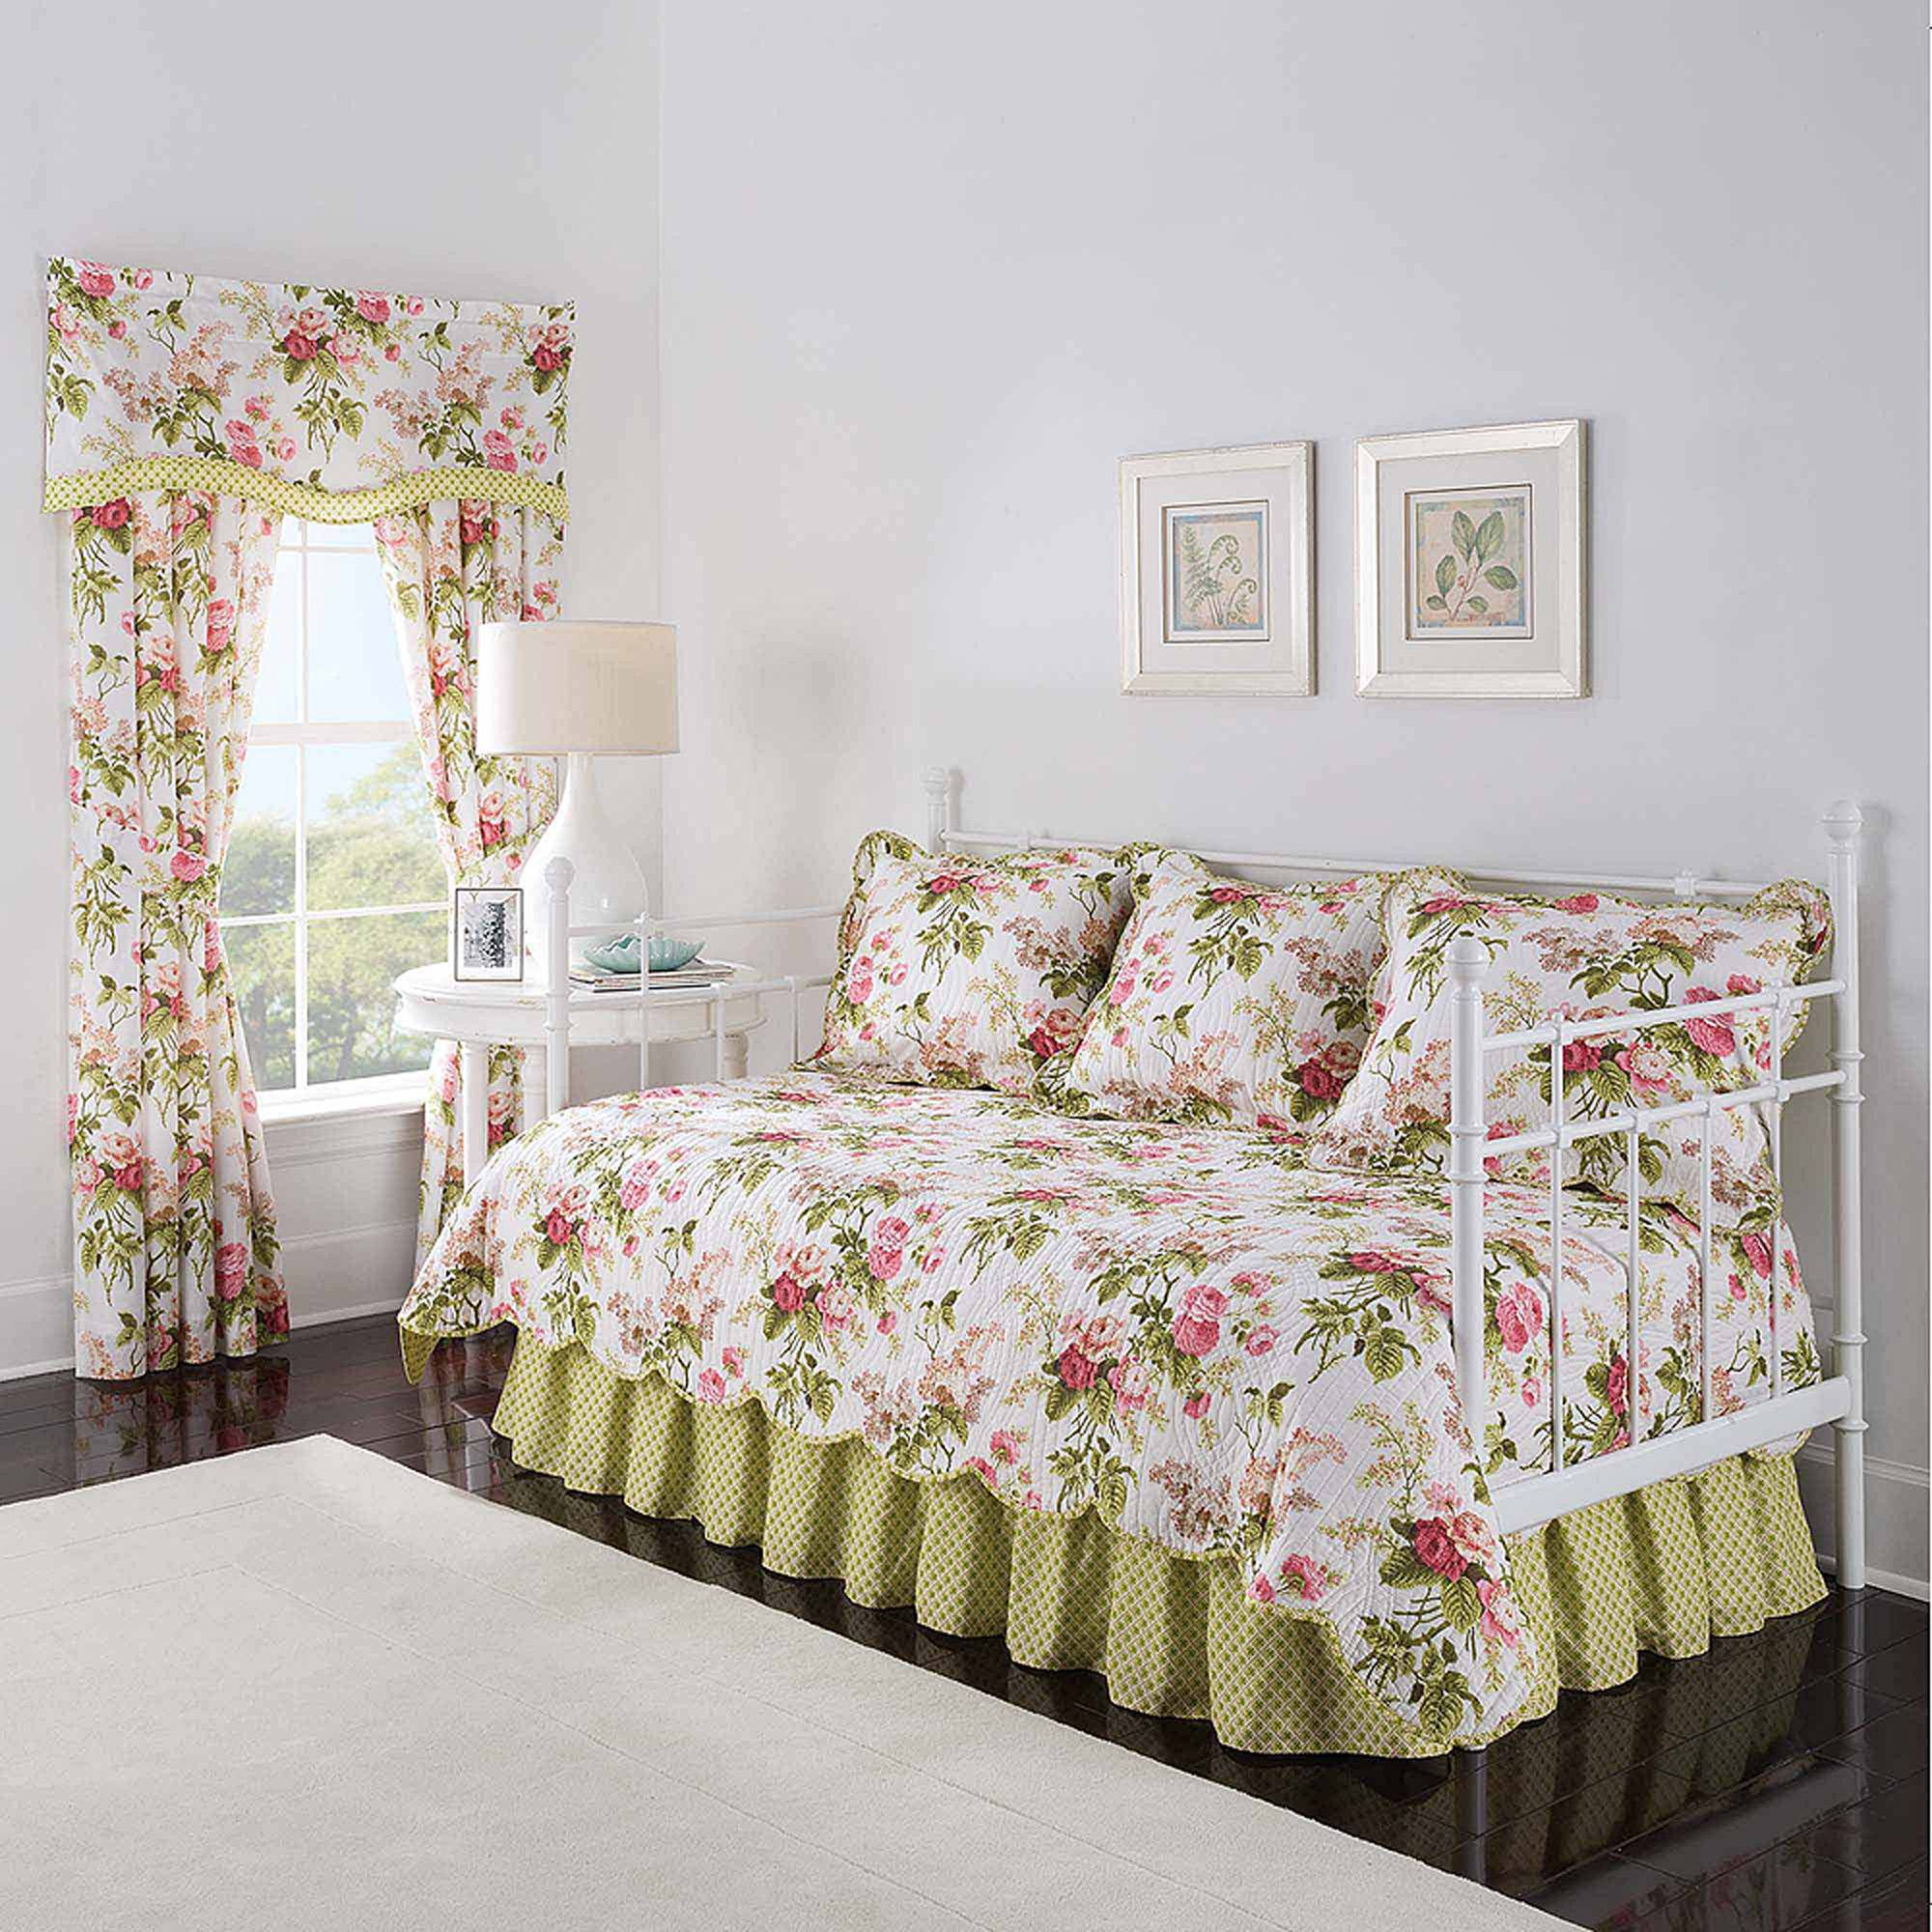 Emma's Garden Daybed Quilt Bedding Collection